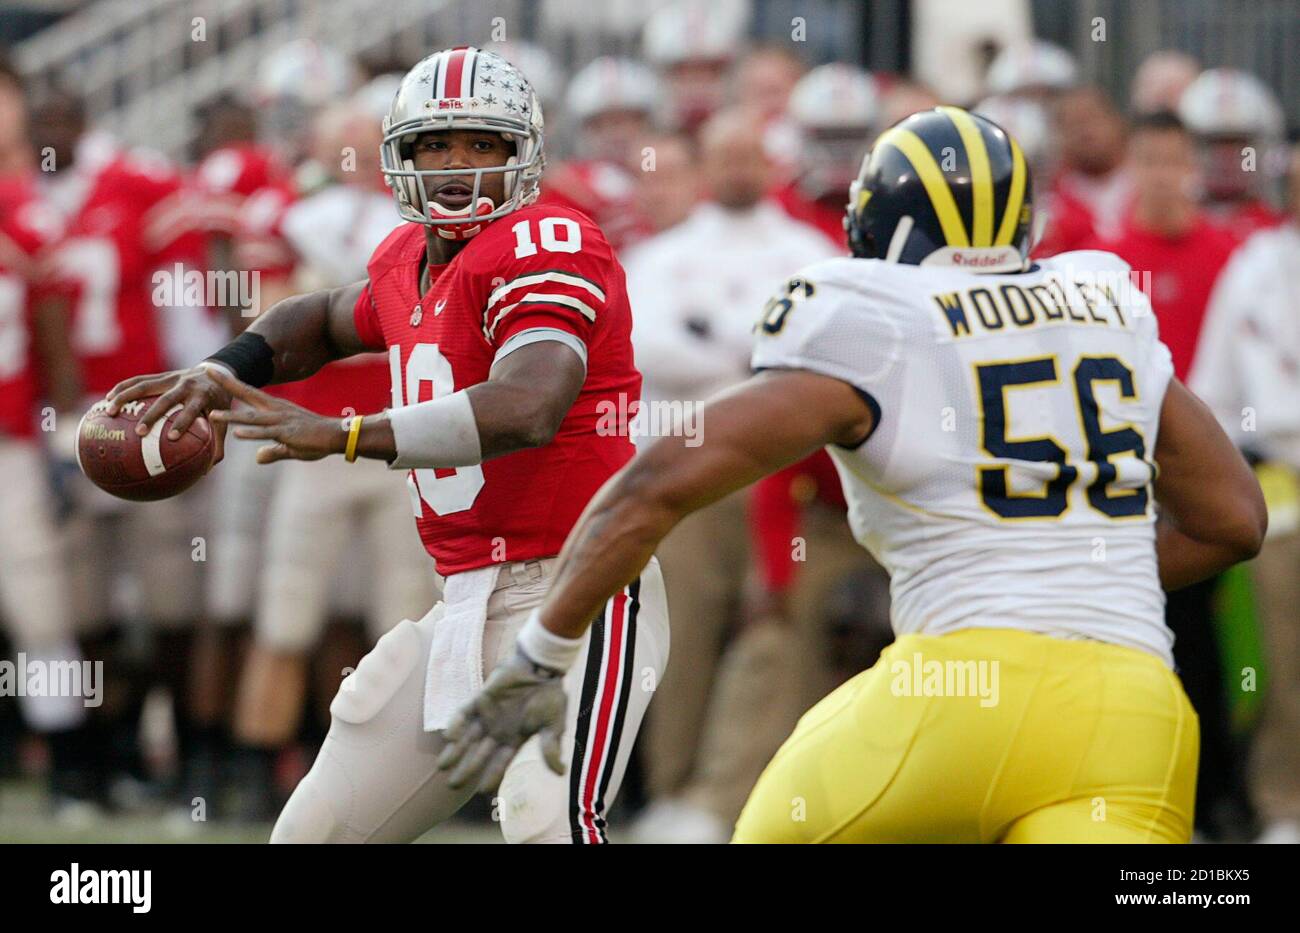 Lamarr woodley High Resolution Stock Photography and Images - Alamy